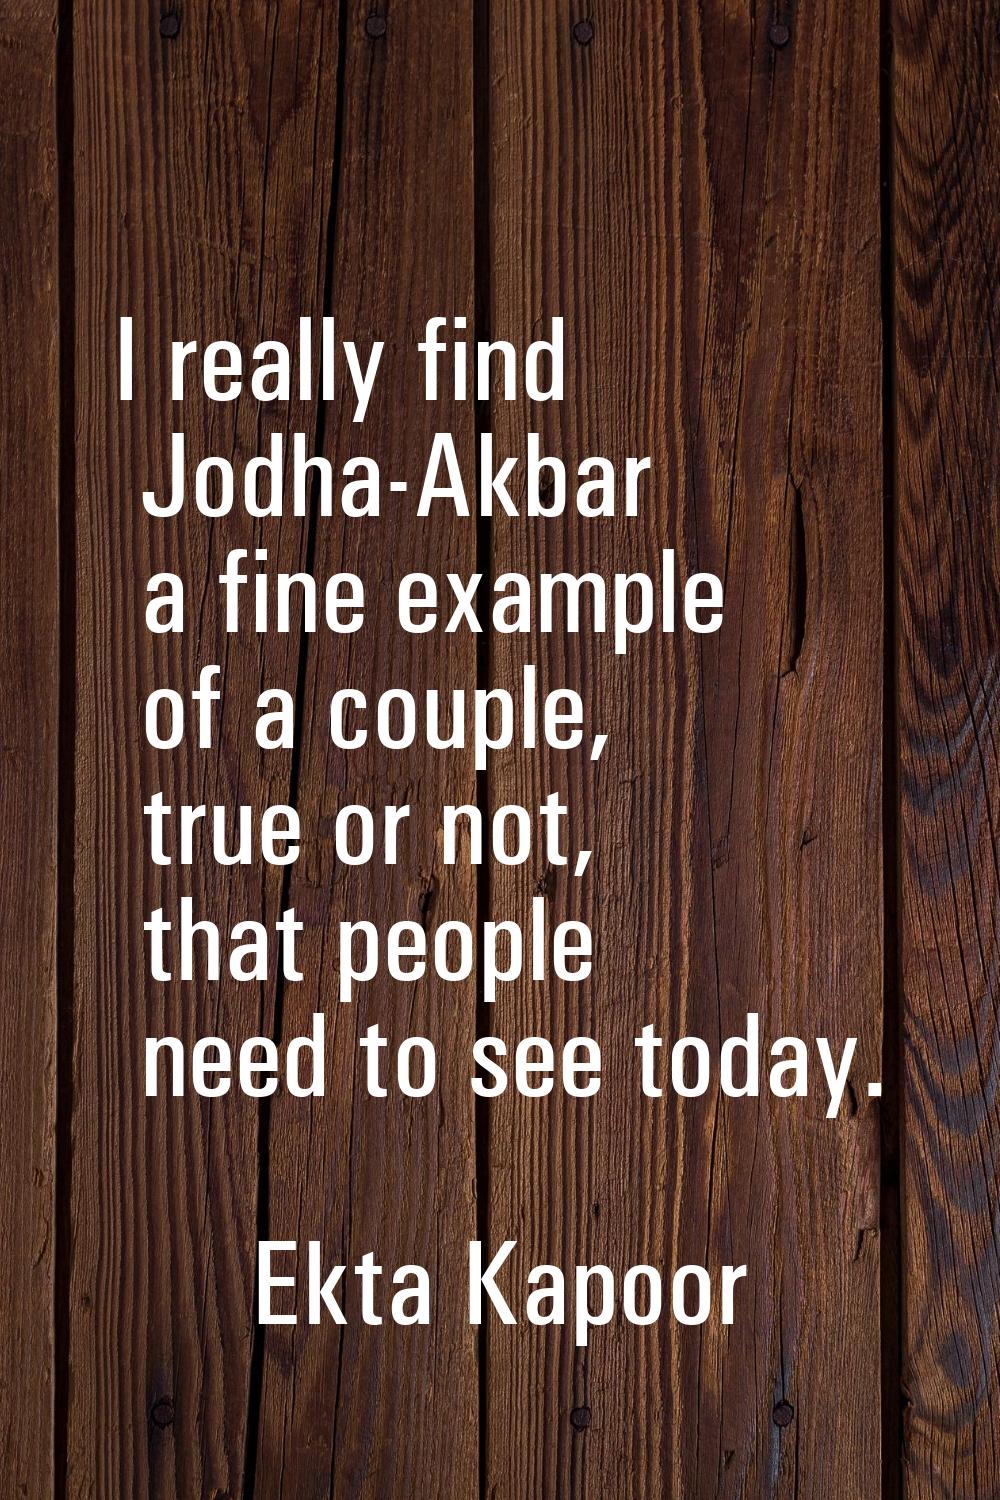 I really find Jodha-Akbar a fine example of a couple, true or not, that people need to see today.